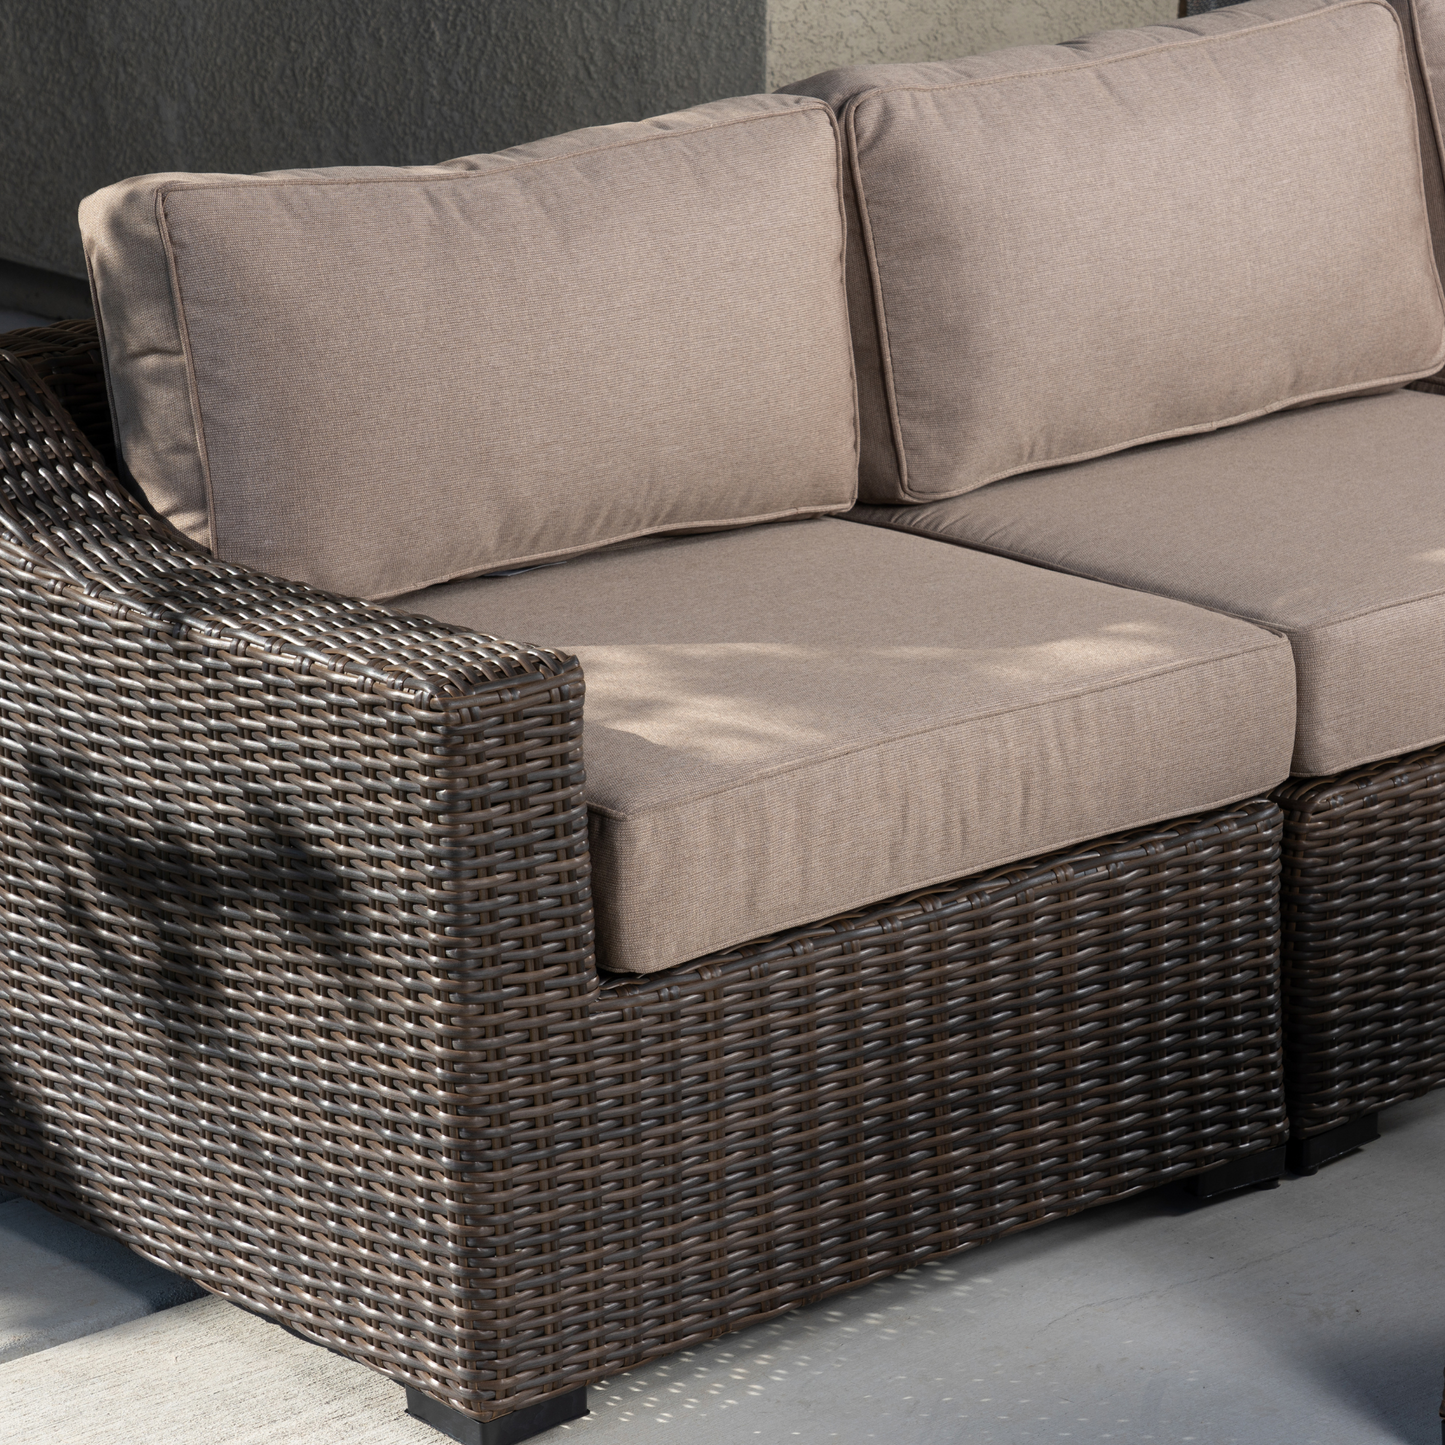 Bristol Wicker Outdoor L Sectional -5 Seat